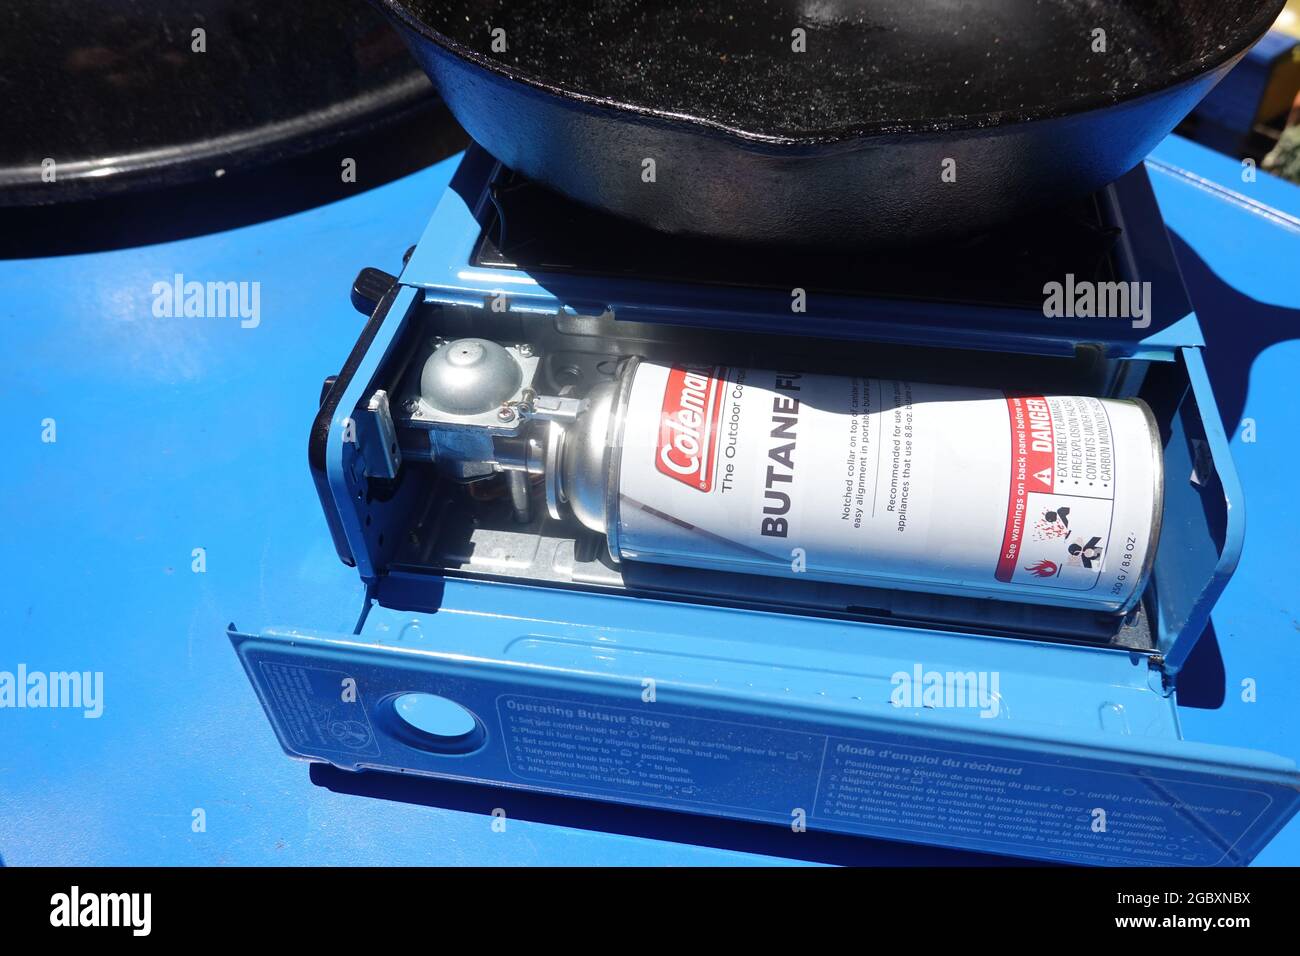 Coleman butane fuel camping stove with cast iron pan and butane gas cylinder Stock Photo